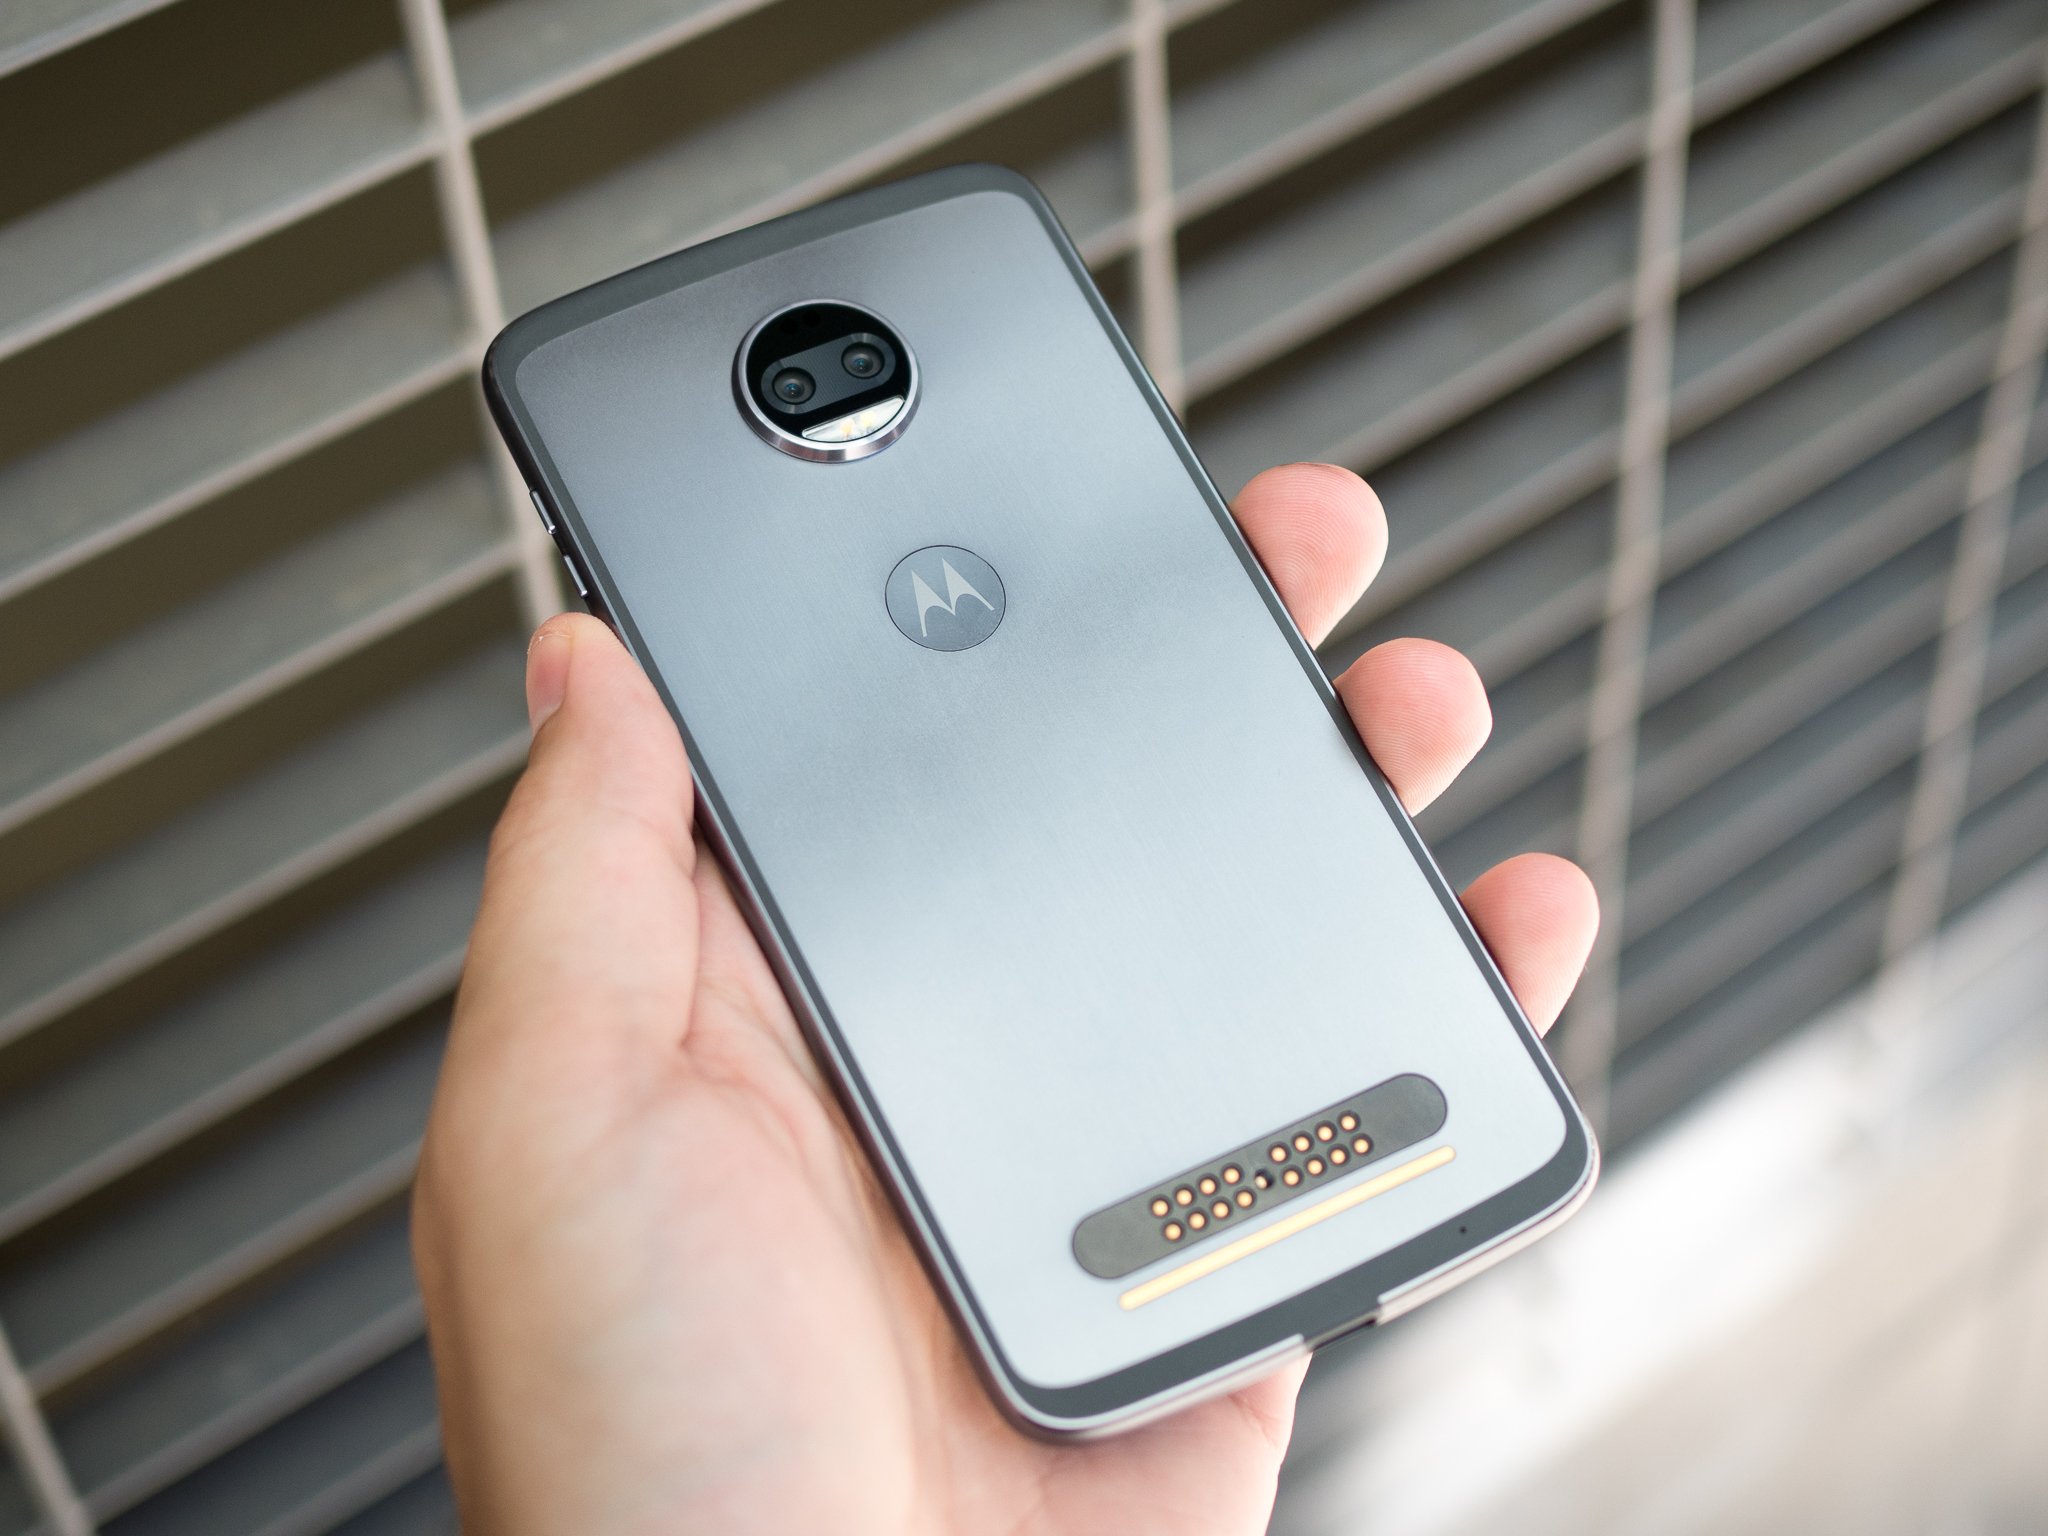 The Moto Z2 Force is a formidable flagship that ships with